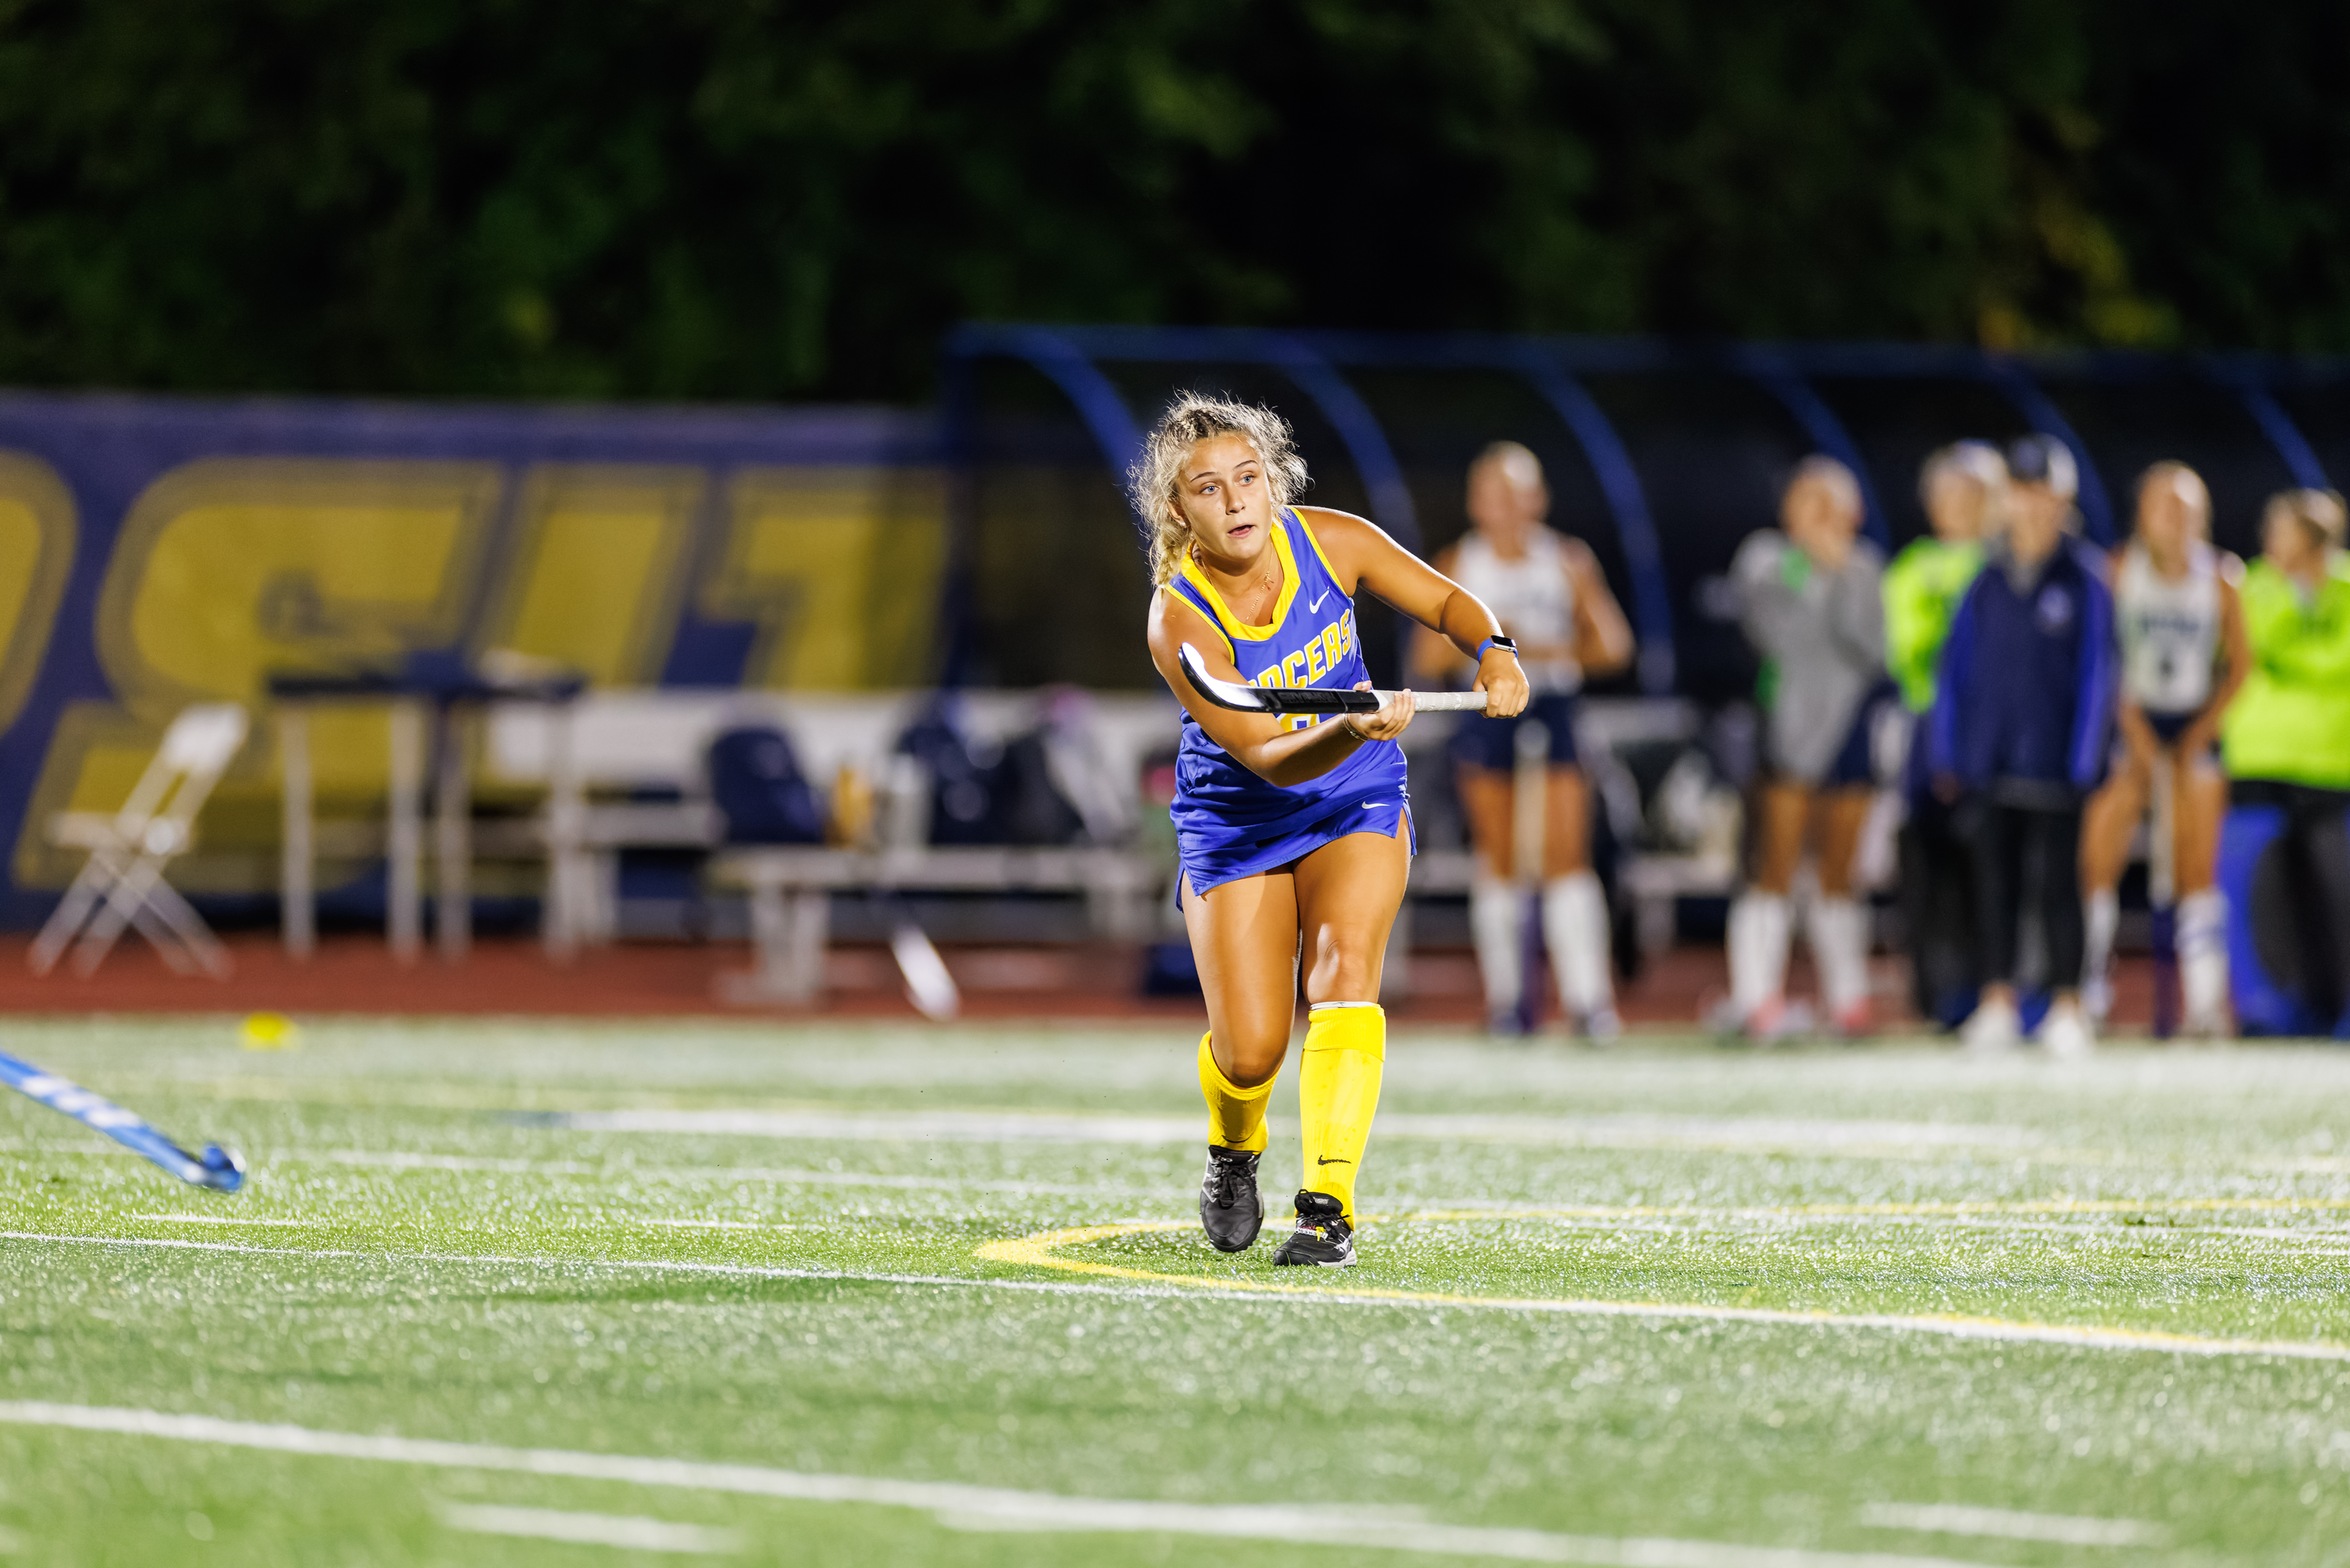 Late Goals Sees Lancer Suffer First Conference Loss of the Season